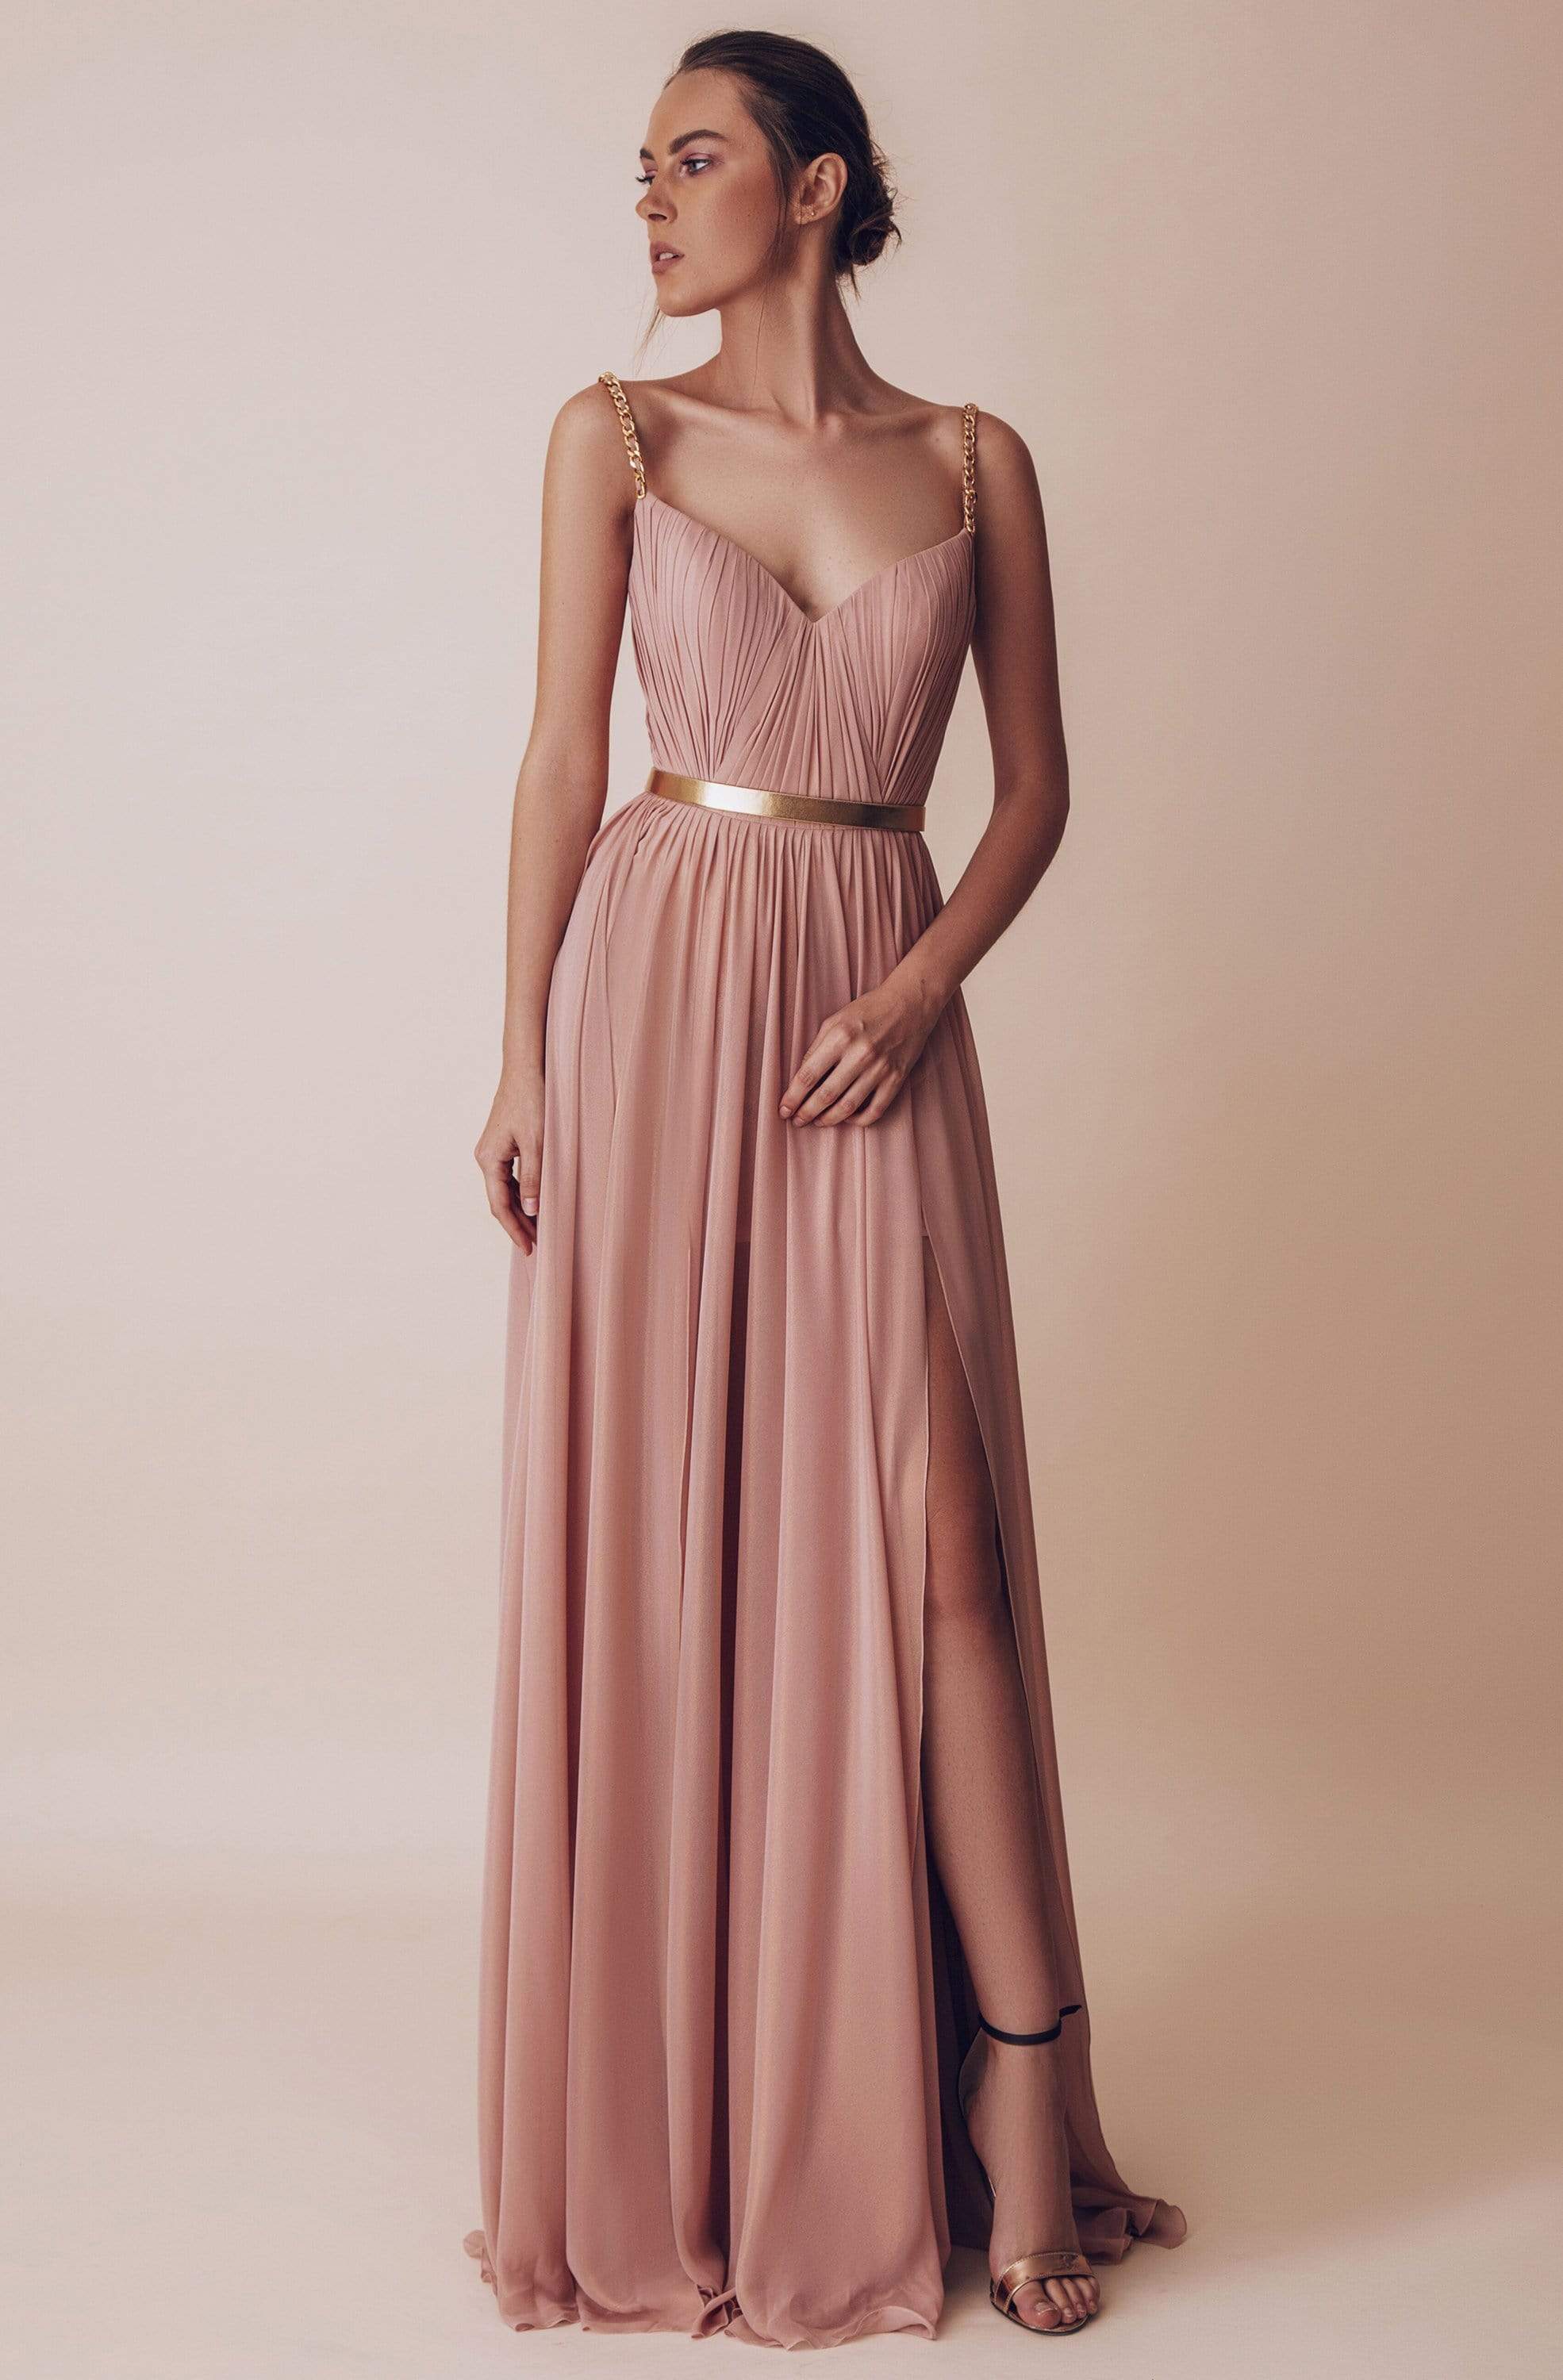 Image of Gatti Nolli Couture - OP-4986 Ruched Plunging Sweetheart A-line Dress